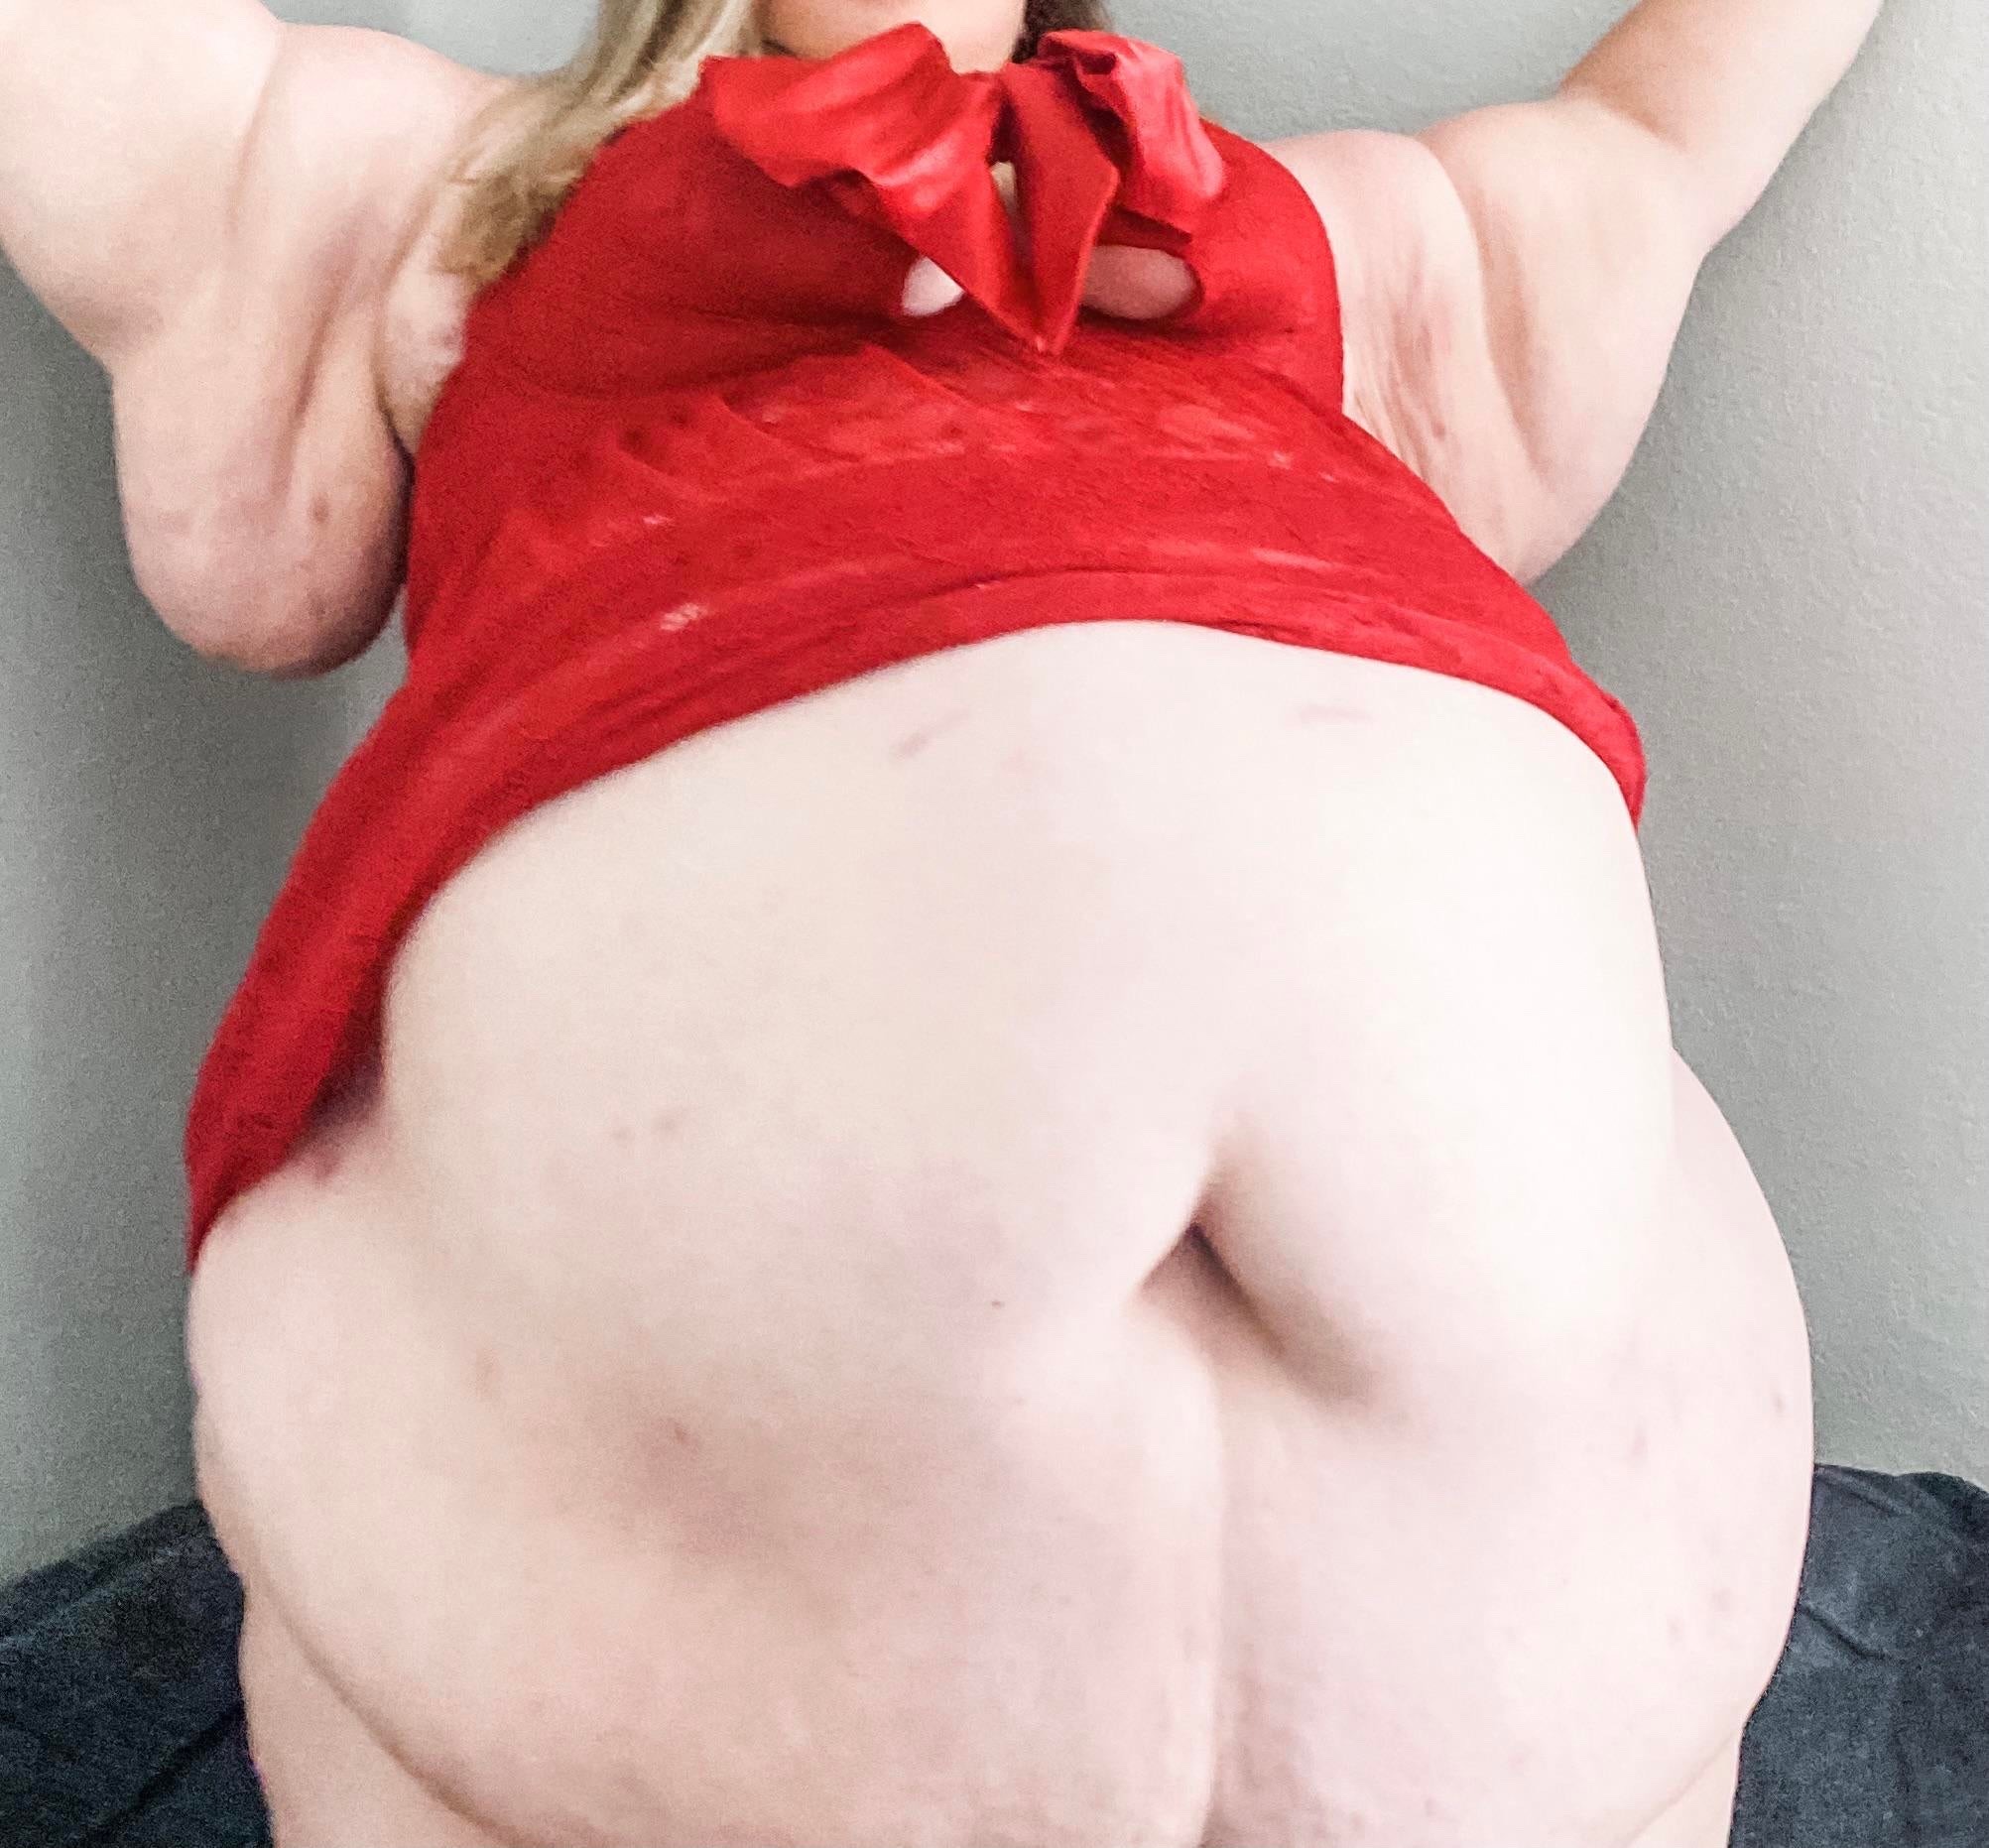 Porn photo a-frank-admirer:Splendorous is a belly that